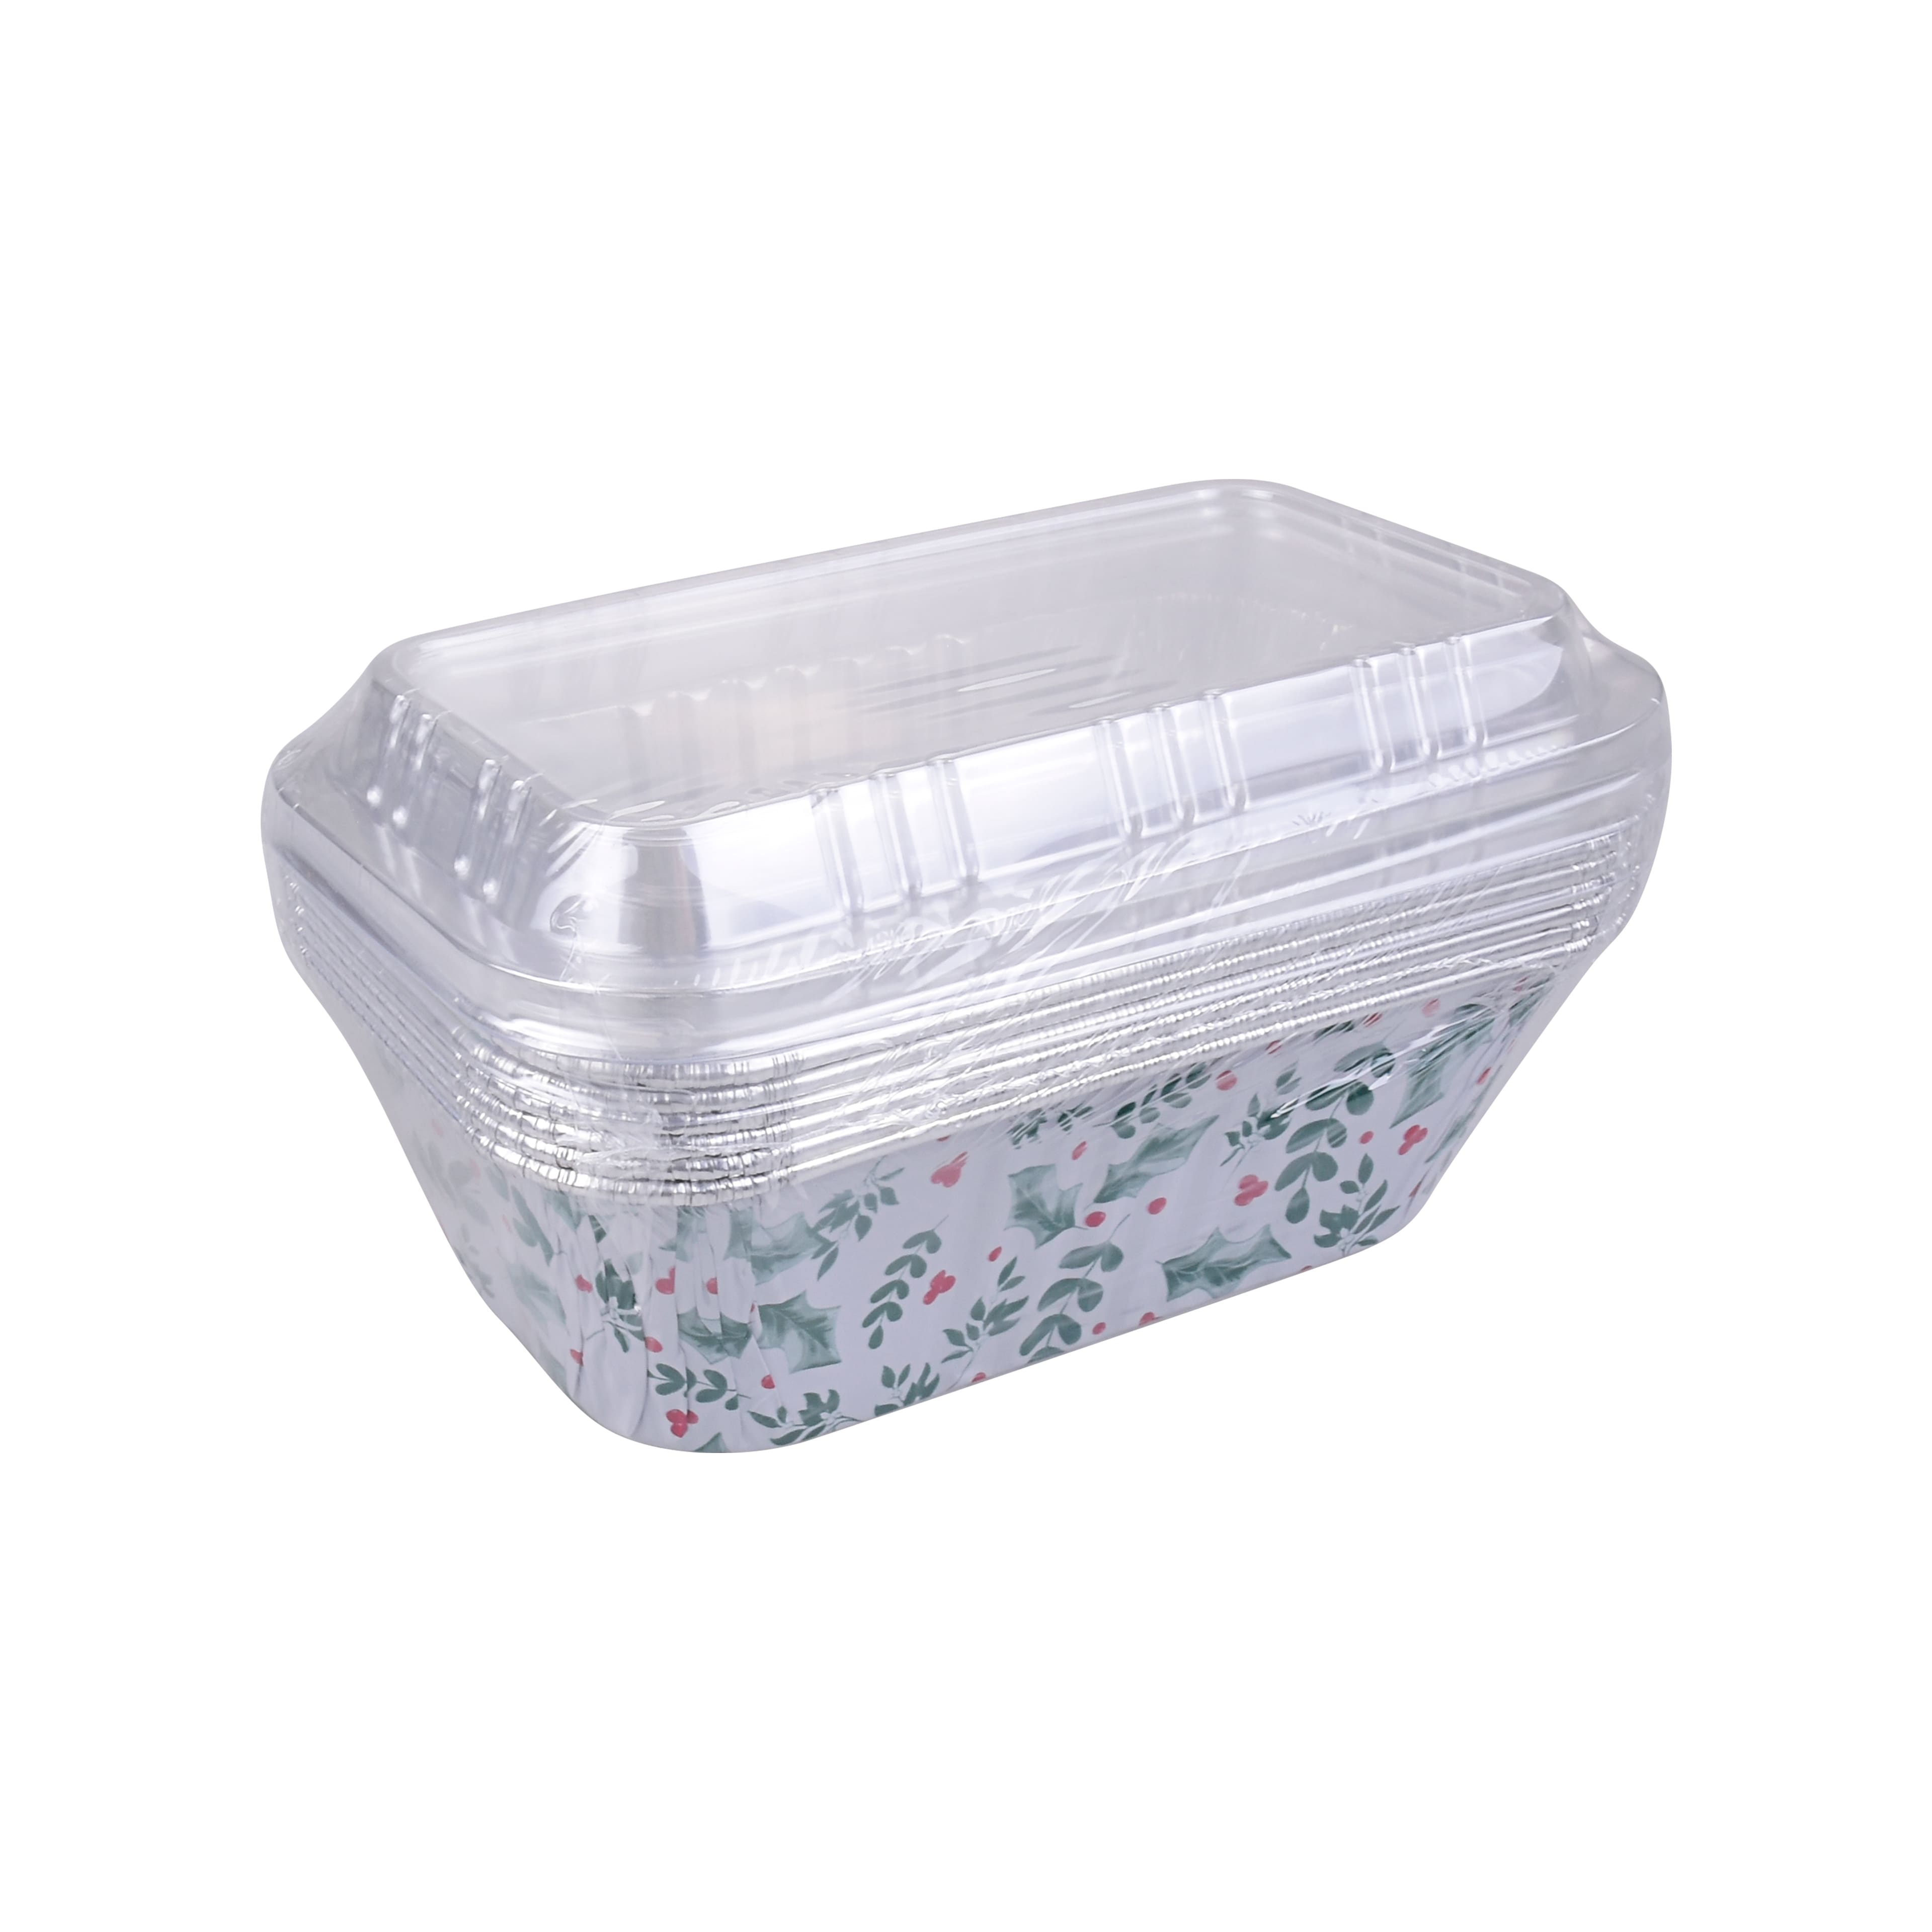 6 Christmas Holiday Holly Disposable Aluminum Baking Pans by Celebrate  It™, 6ct.